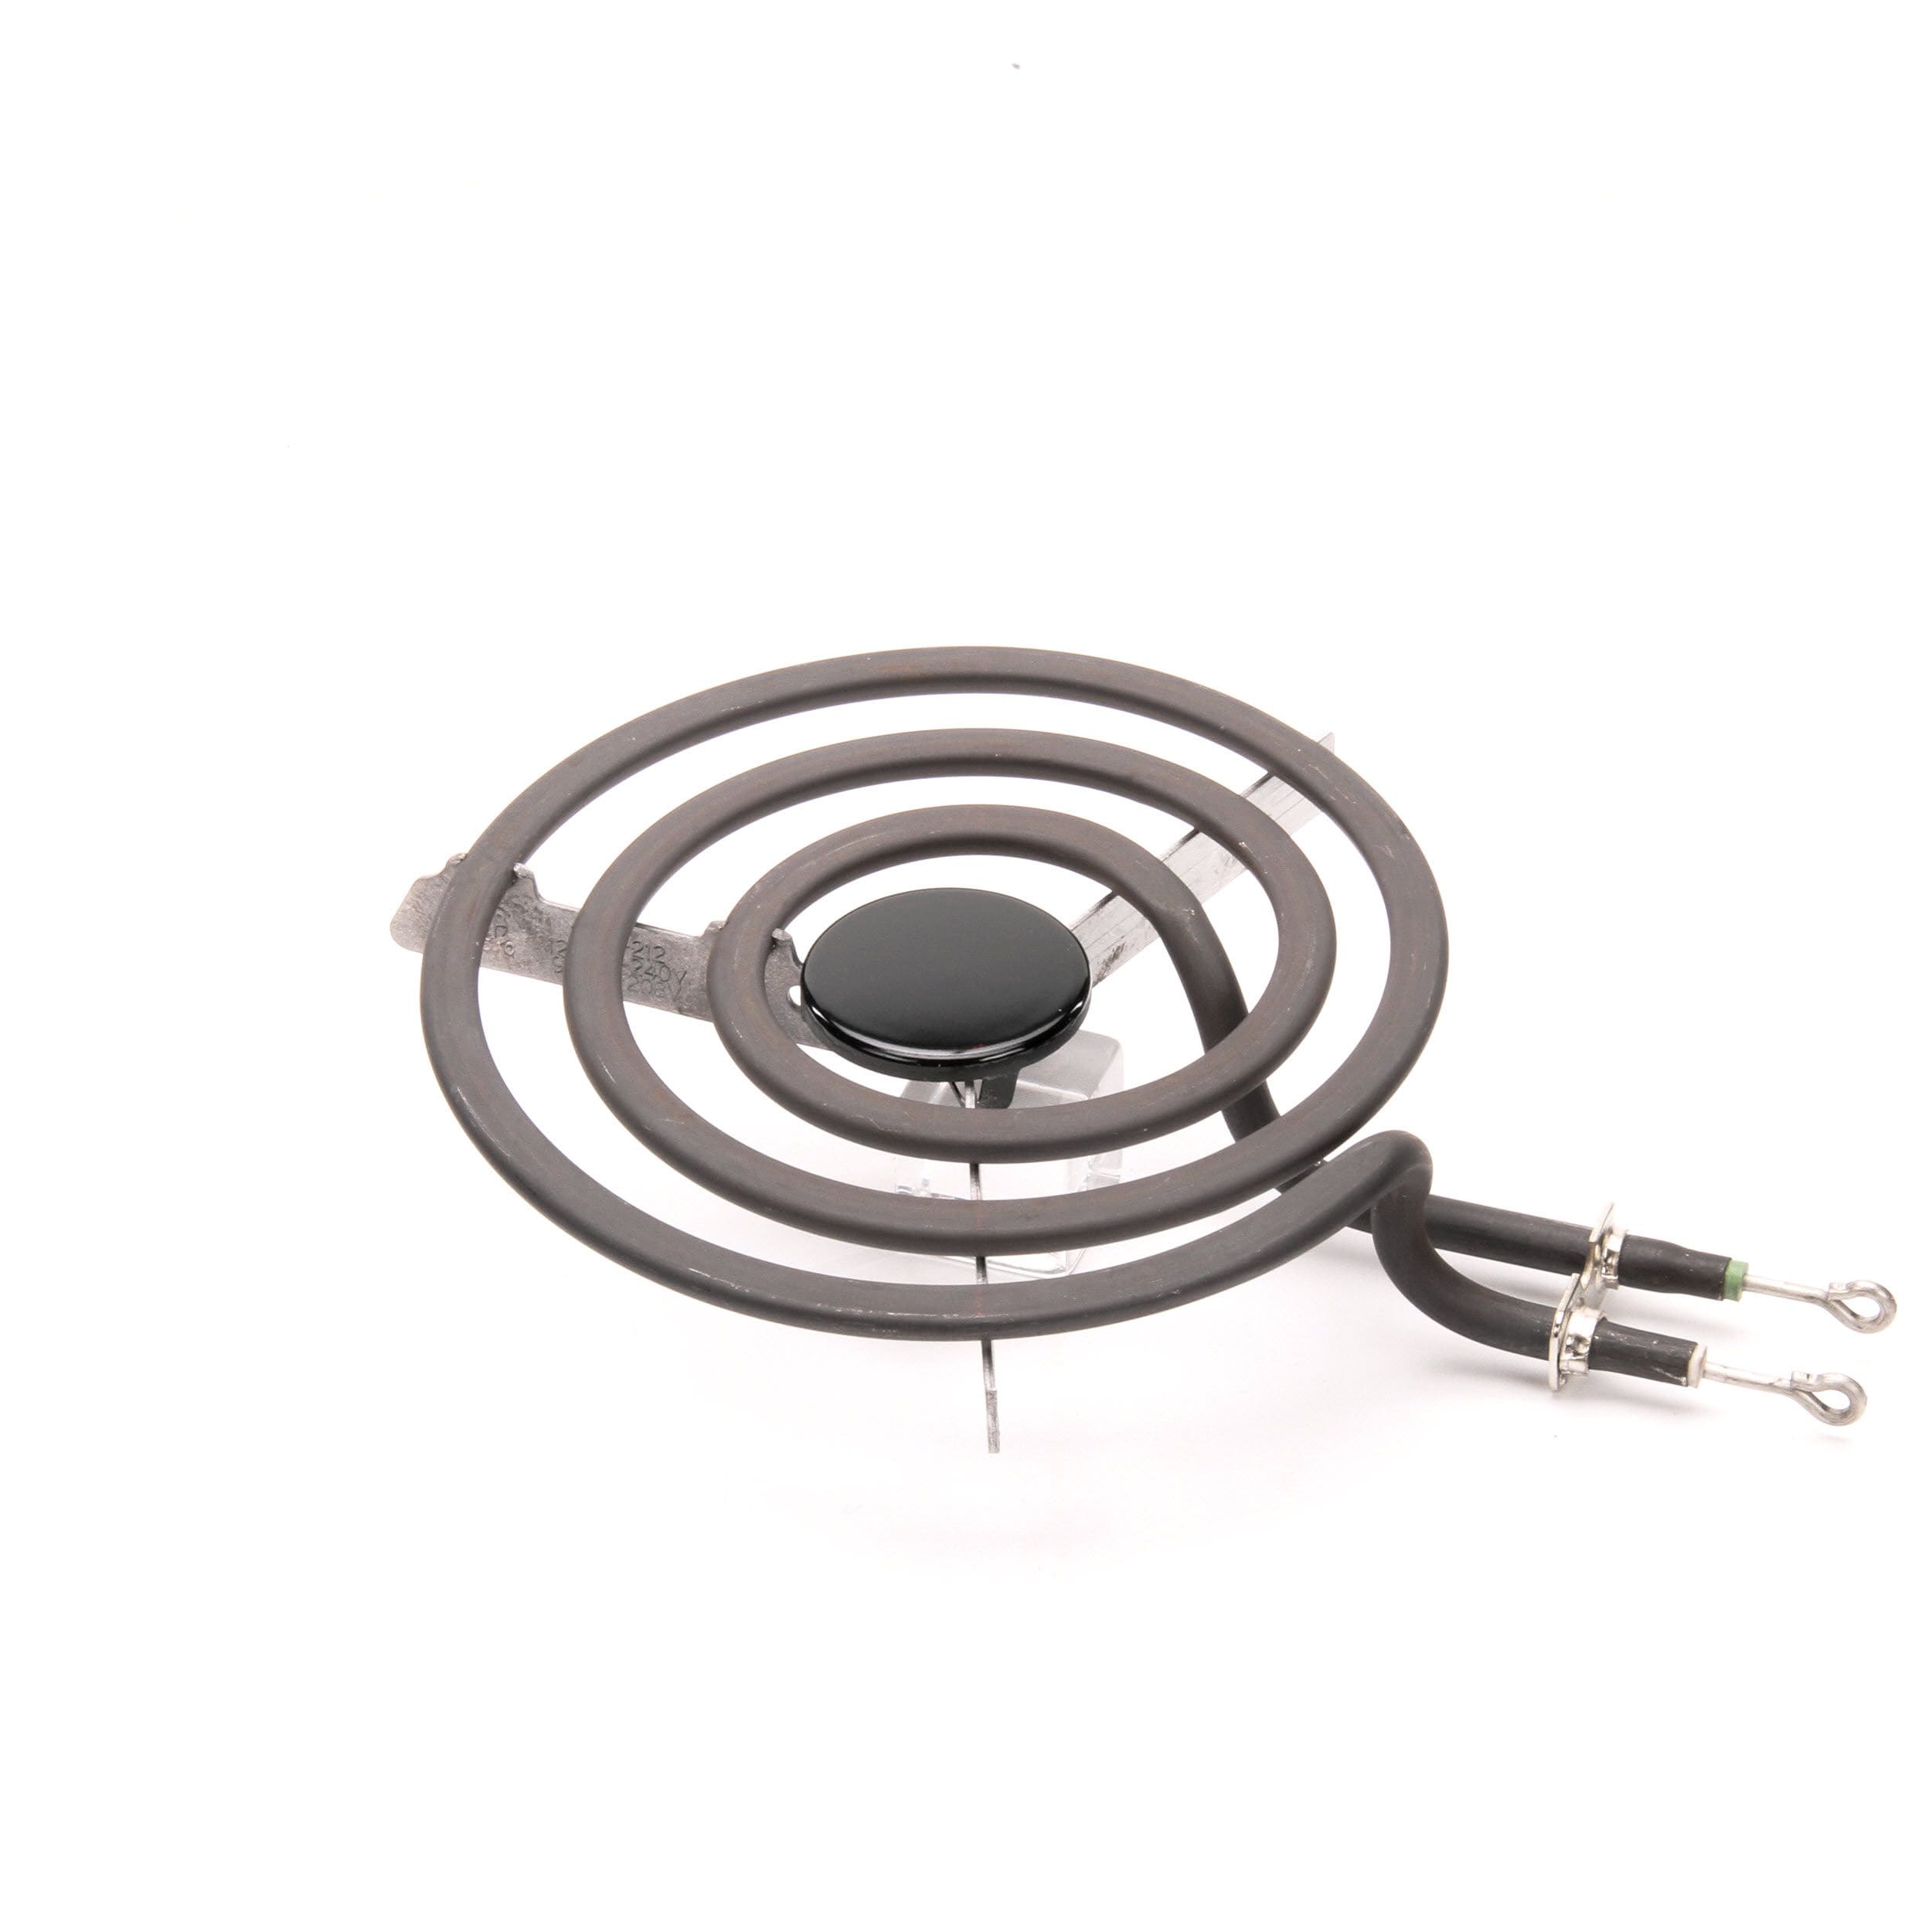 Universal Range Cooktop Stove 6" Small Heavy Duty Surface Burner Heating Element